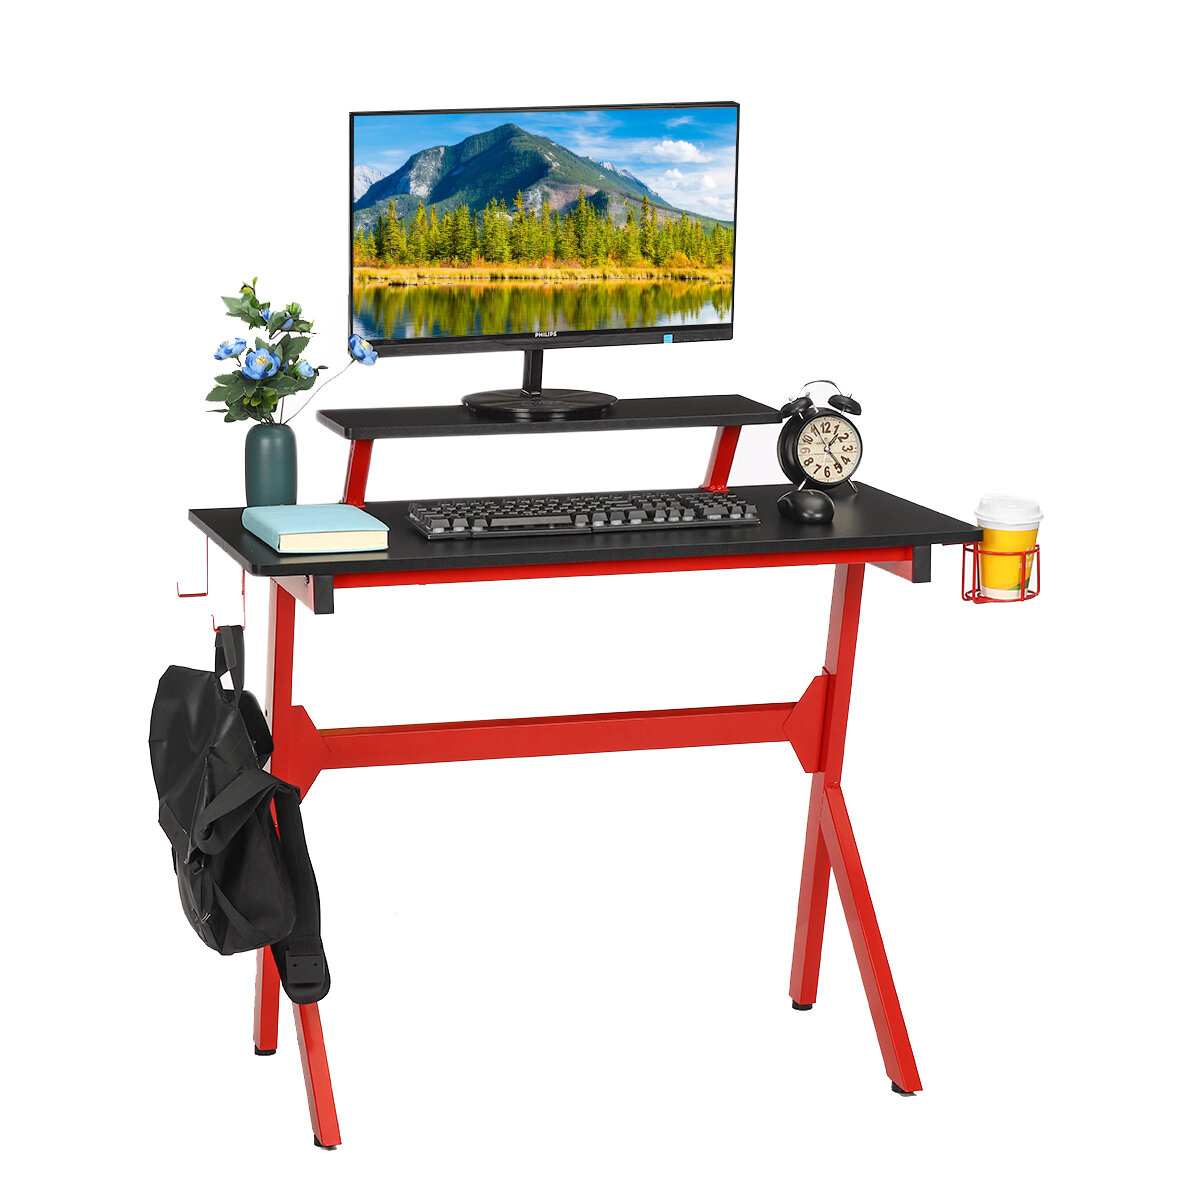 Image of Hoffree Ergonomic Gaming Desk E-sports Computer Office Table PC Laptop Desk Gamer Tables with Cup Holder for iMac